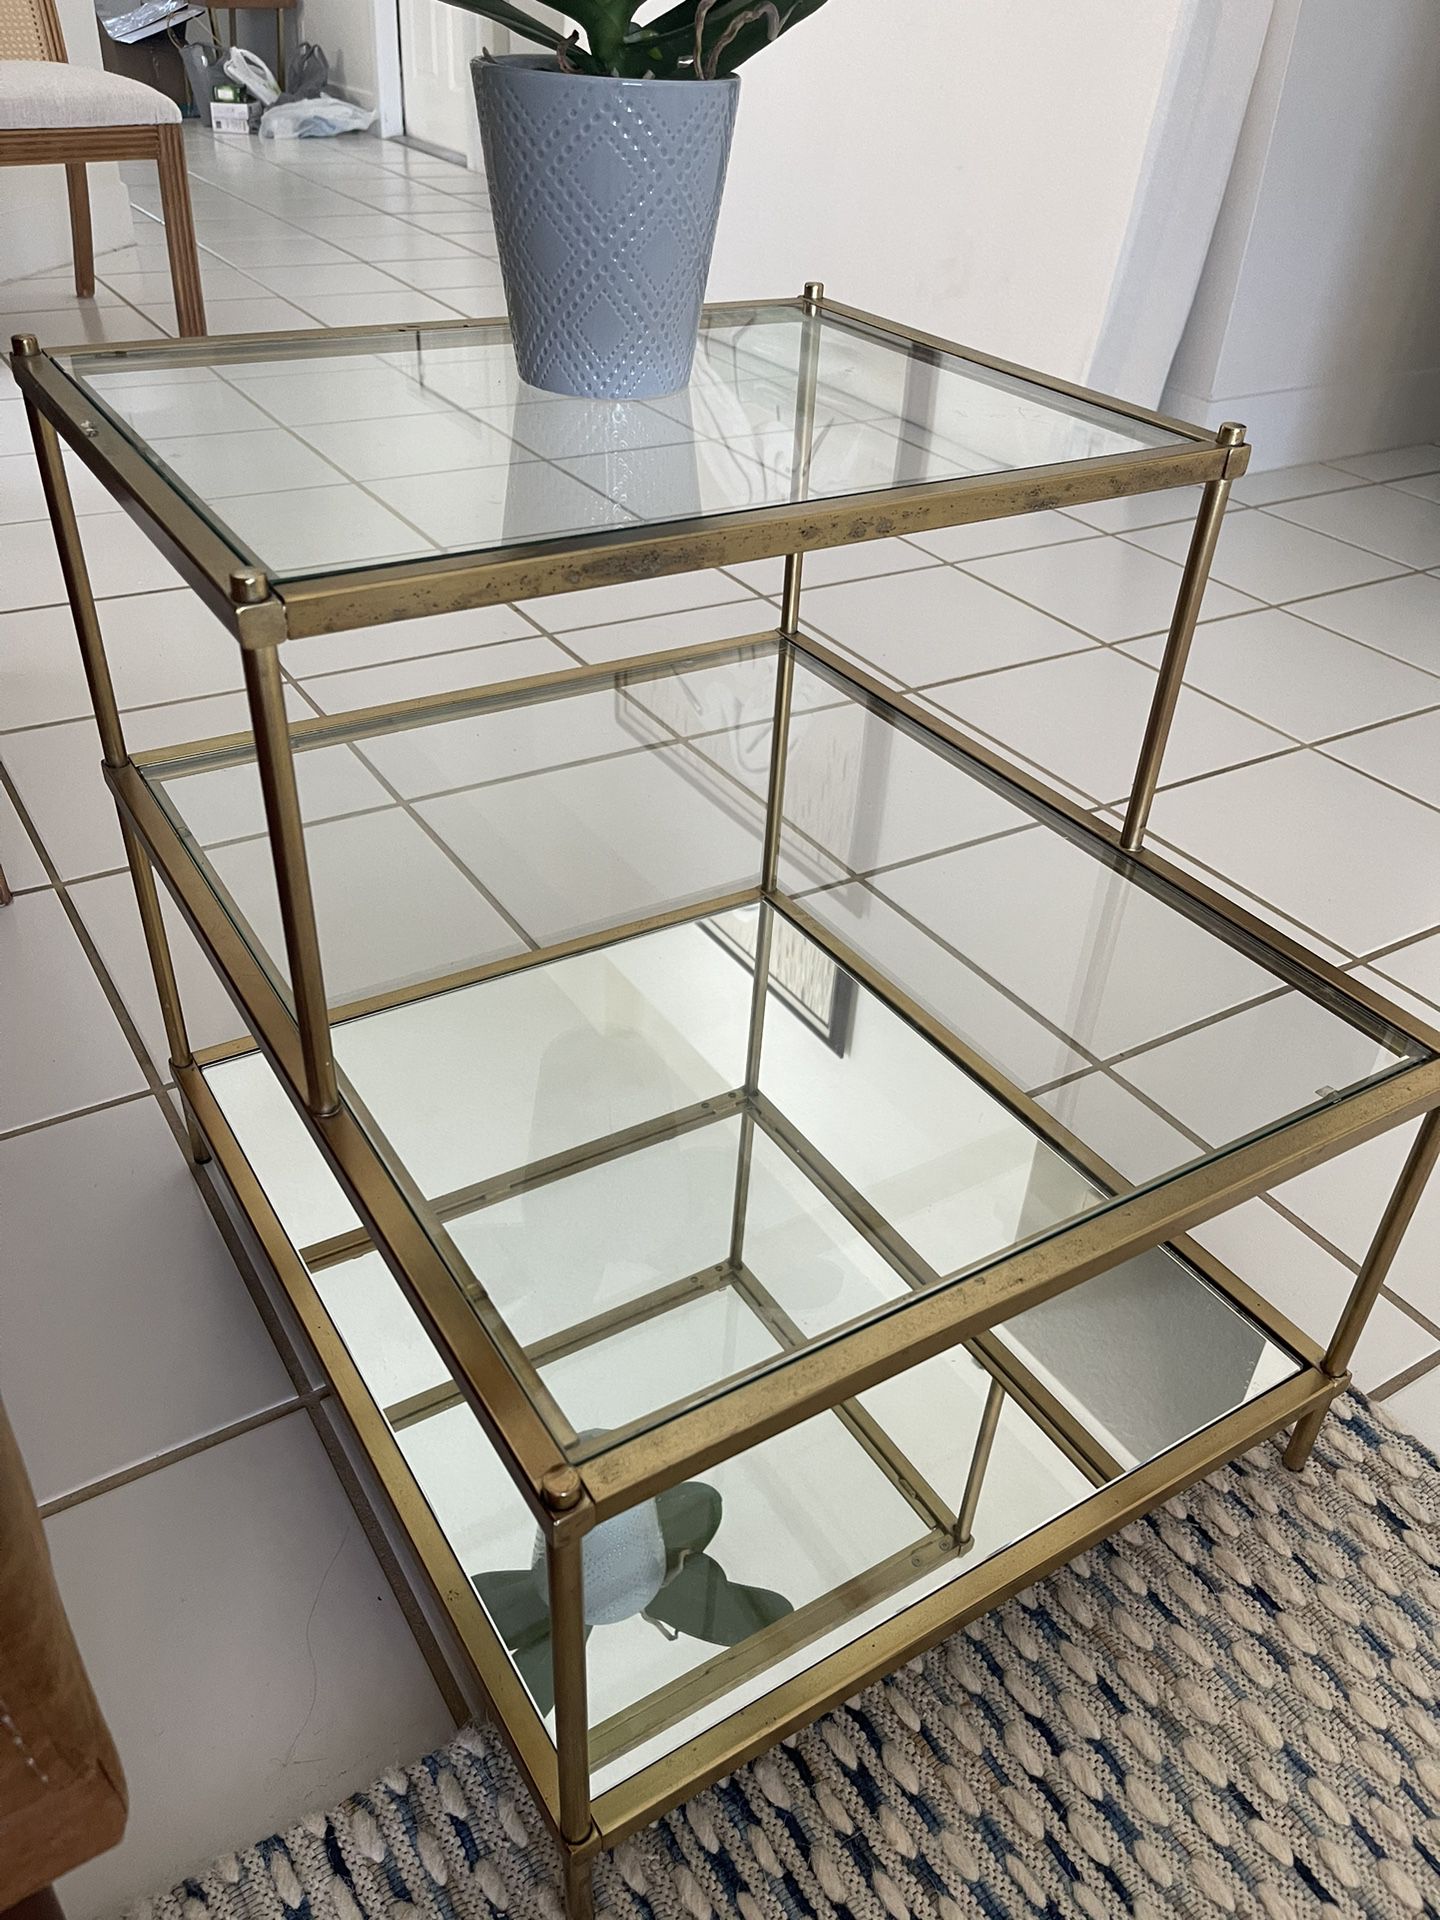 Gold & Glass Coffee Table 